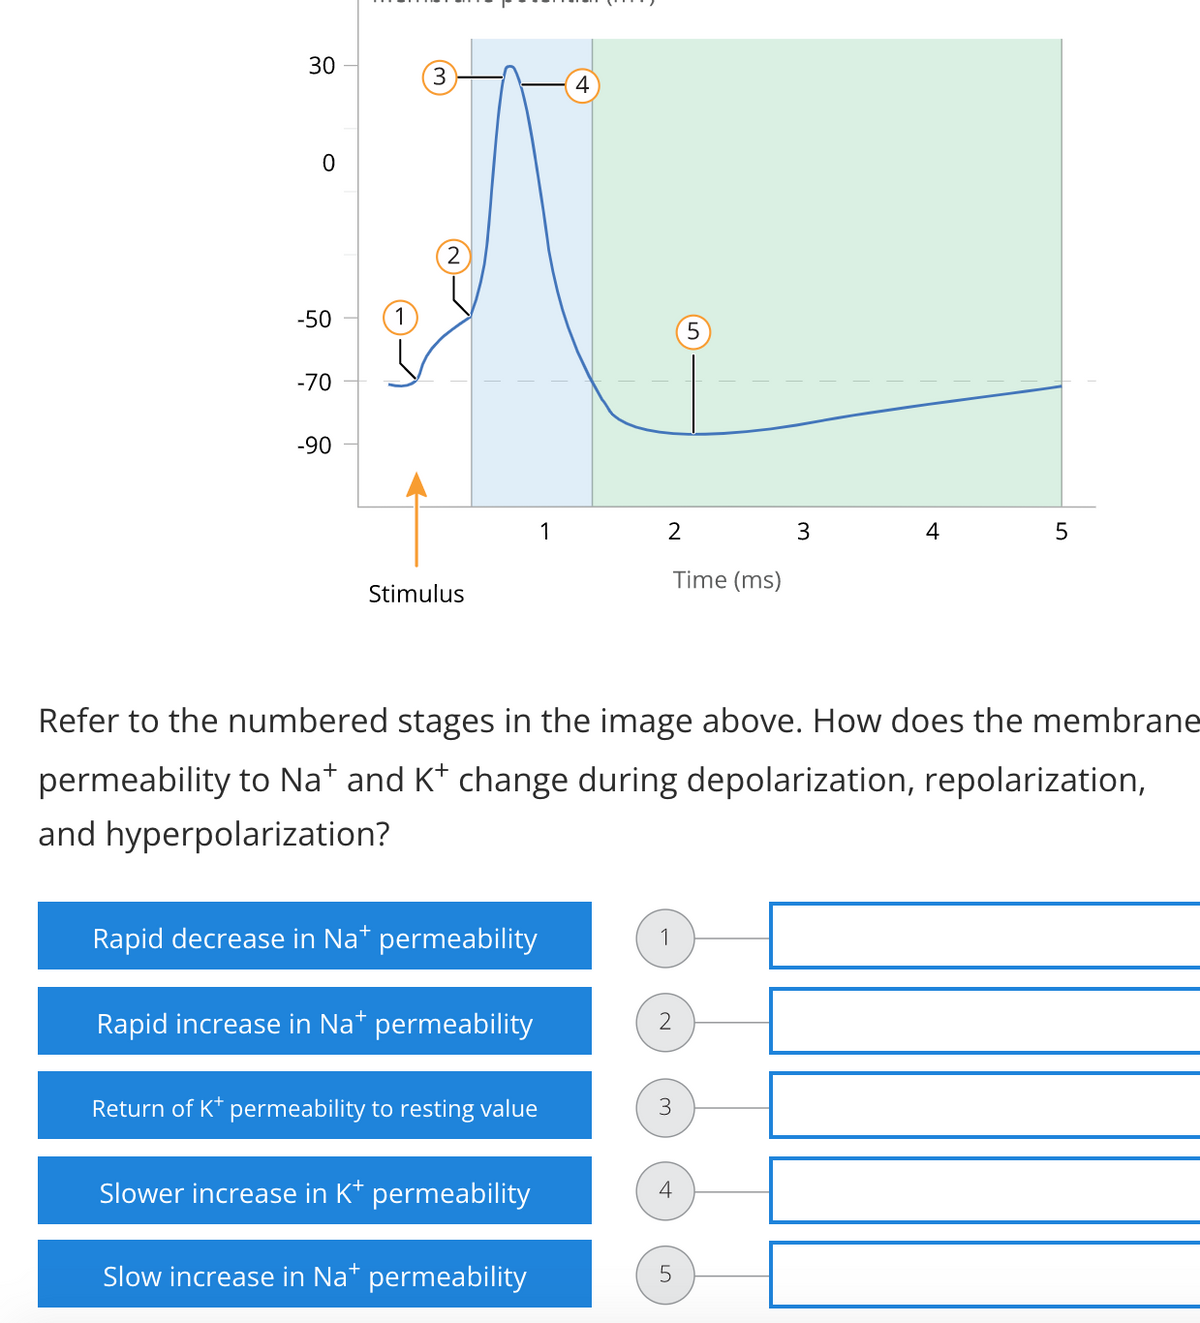 30
0
-50
-70
-90
3
4
1
2
4
5
Time (ms)
Stimulus
Refer to the numbered stages in the image above. How does the membrane
permeability to Na+ and K* change during depolarization, repolarization,
and hyperpolarization?
Rapid decrease in Na* permeability
Rapid increase in Na* permeability
2
Return of K* permeability to resting value
Slower increase in K+ permeability
Slow increase in Na* permeability
3
4
5
3